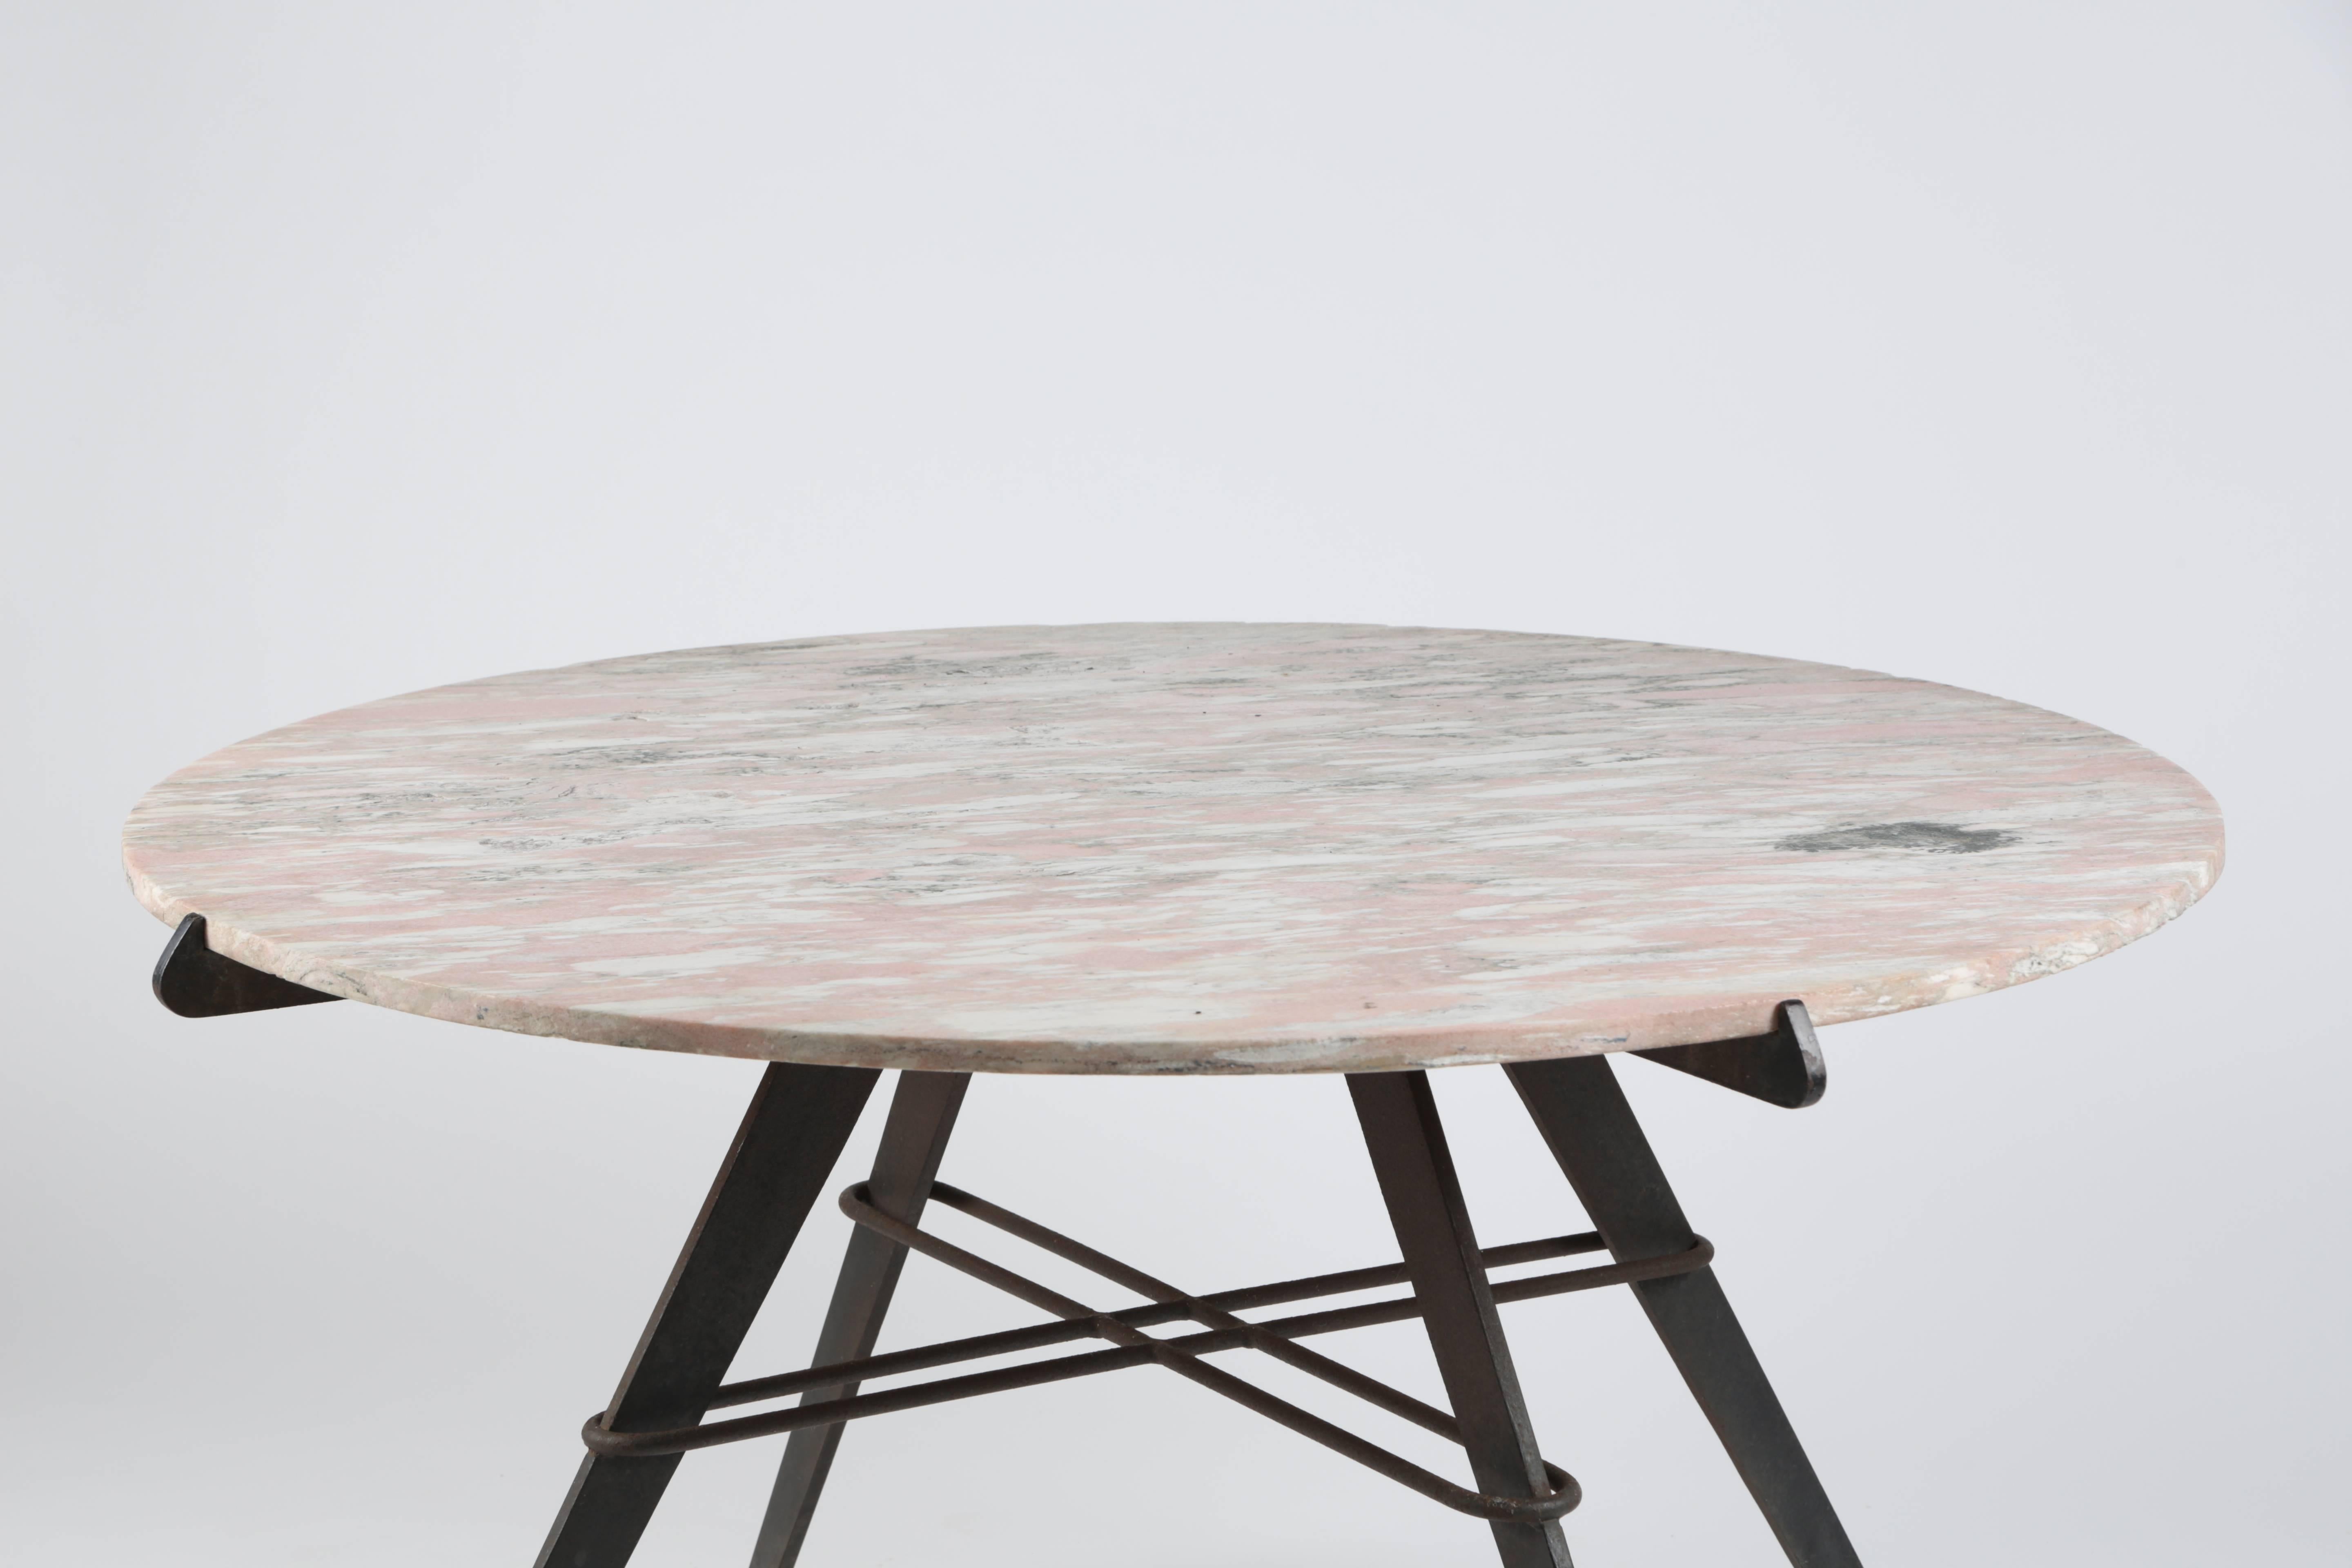 Iron Table with Marble Top by William 